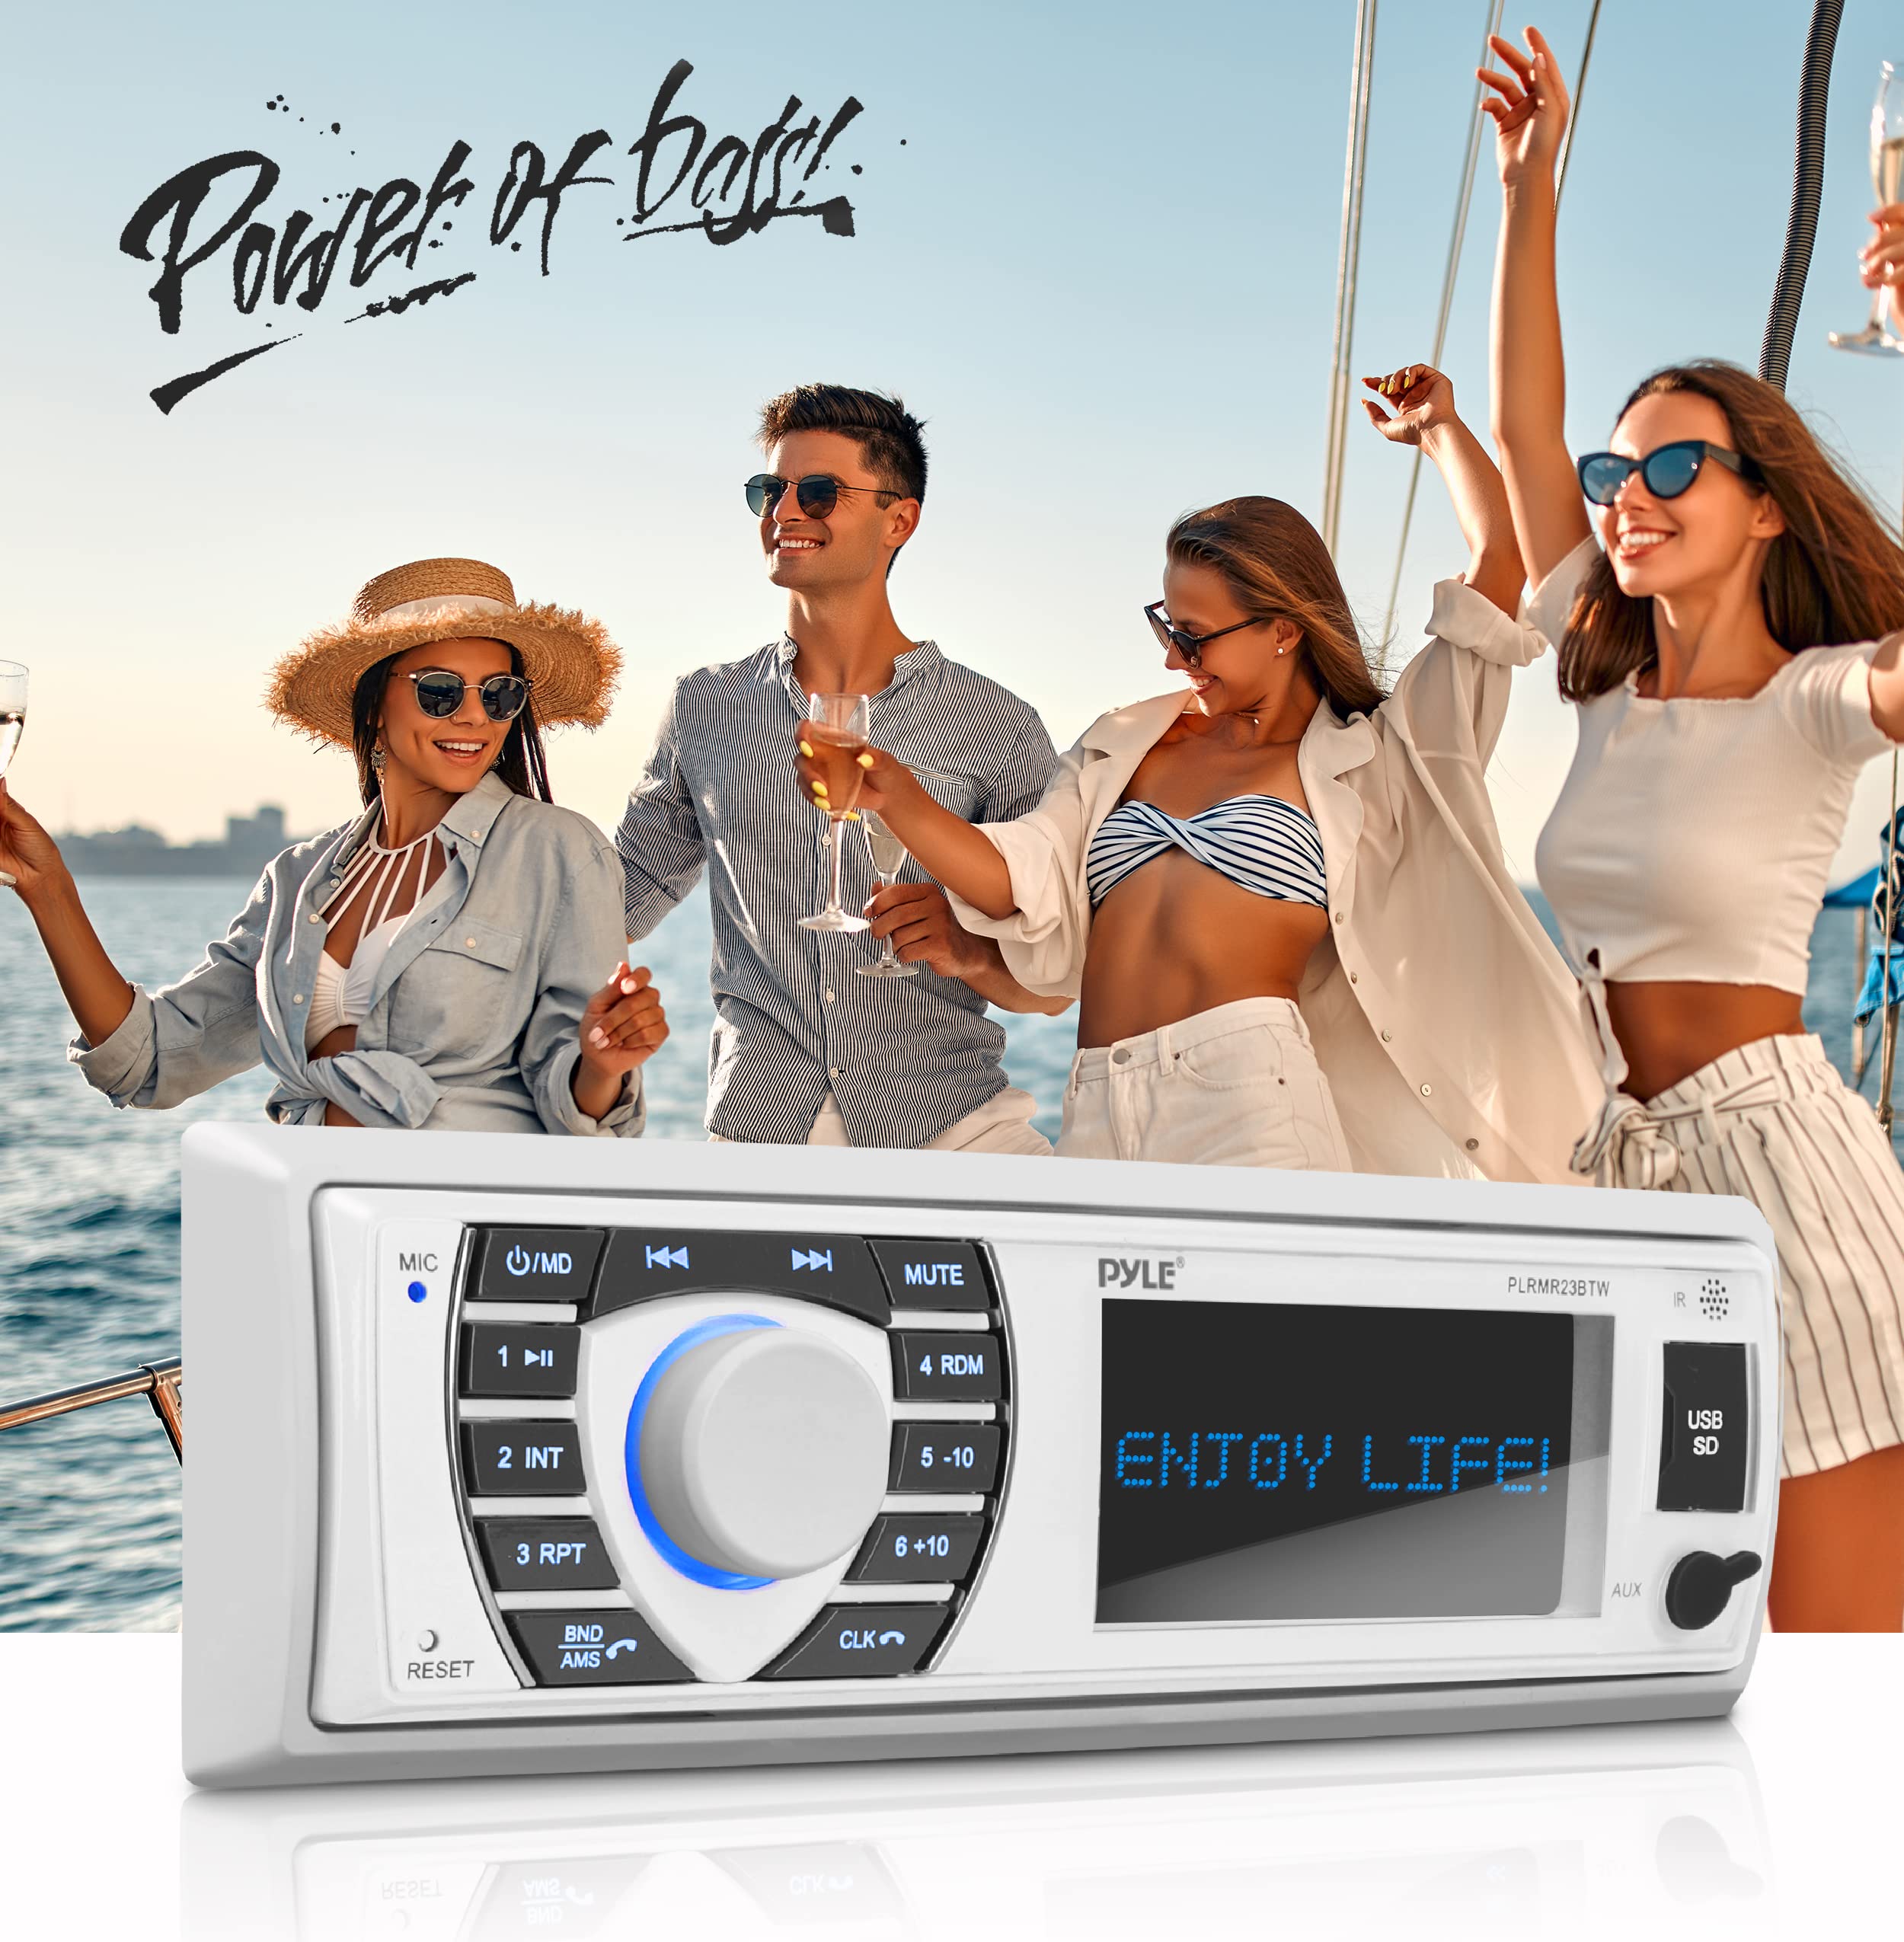 Pyle Bluetooth Marine Receiver Stereo - 12v Single DIN Style Boat In dash Radio Receiver System with Digital LCD, RCA, MP3, USB, SD, AM FM Radio - Remote Control, Wiring Harness - PLRMR23BTW (White)